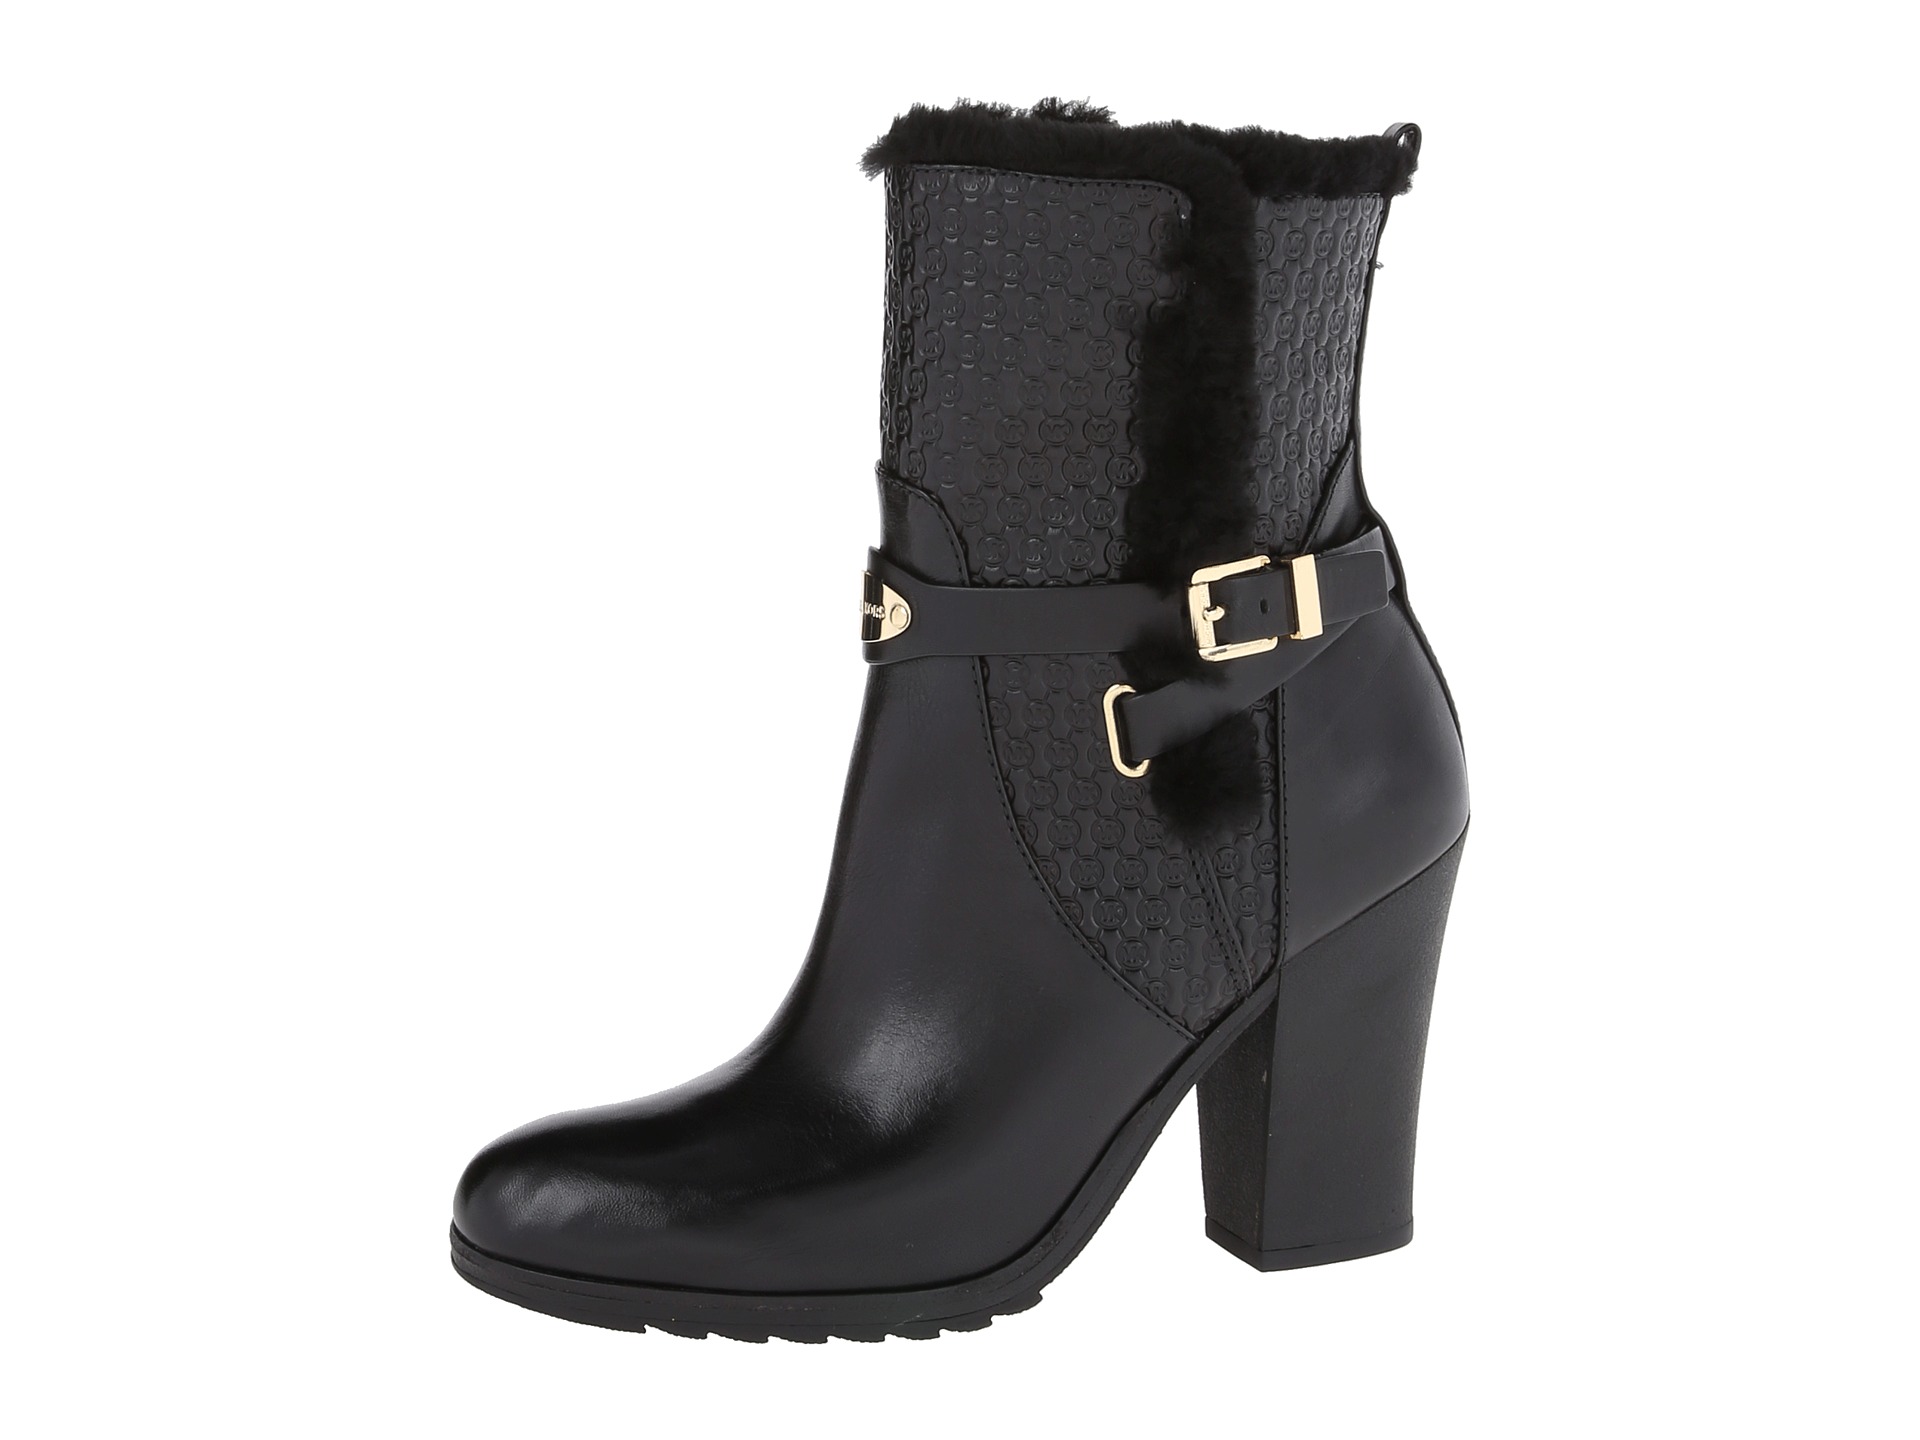 Michael Michael Kors Breck Ankle Boot | Shipped Free at Zappos